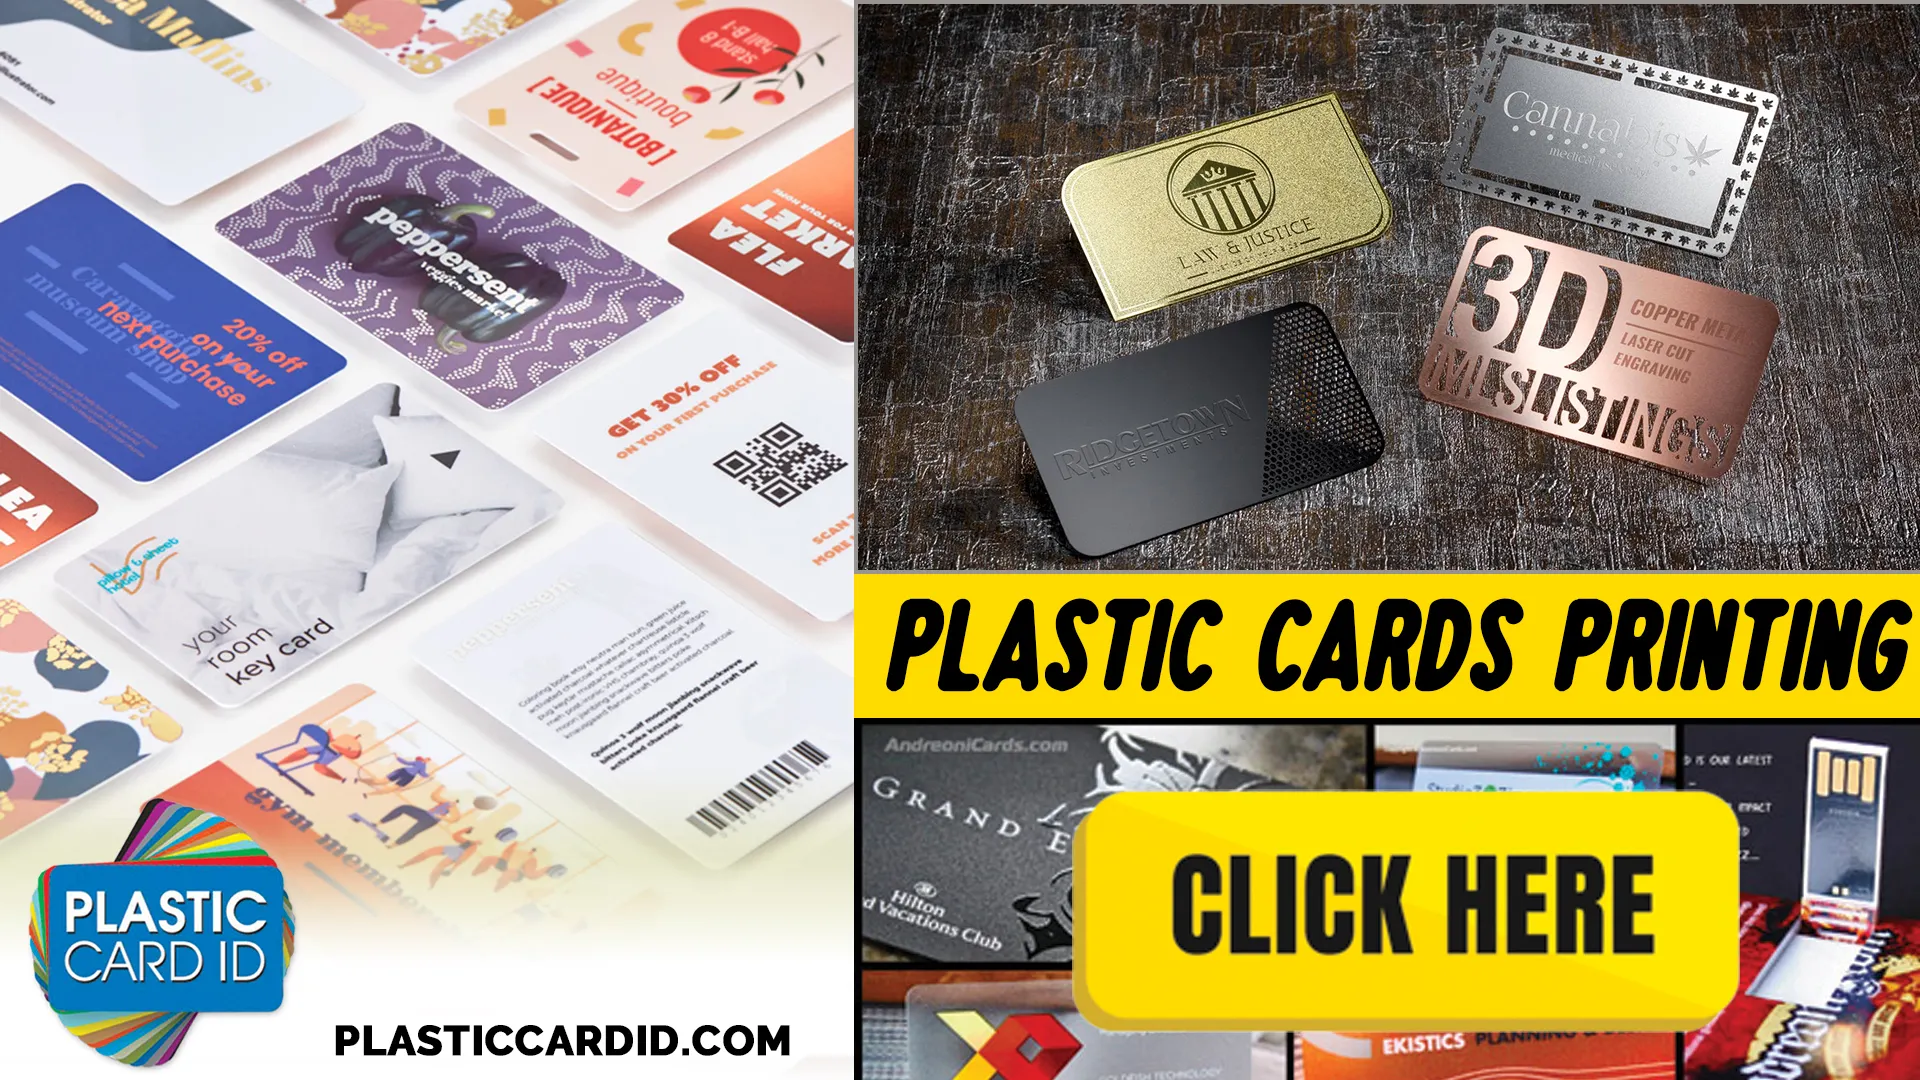 Tech-Integrated Plastic Cards: Beyond Transactions